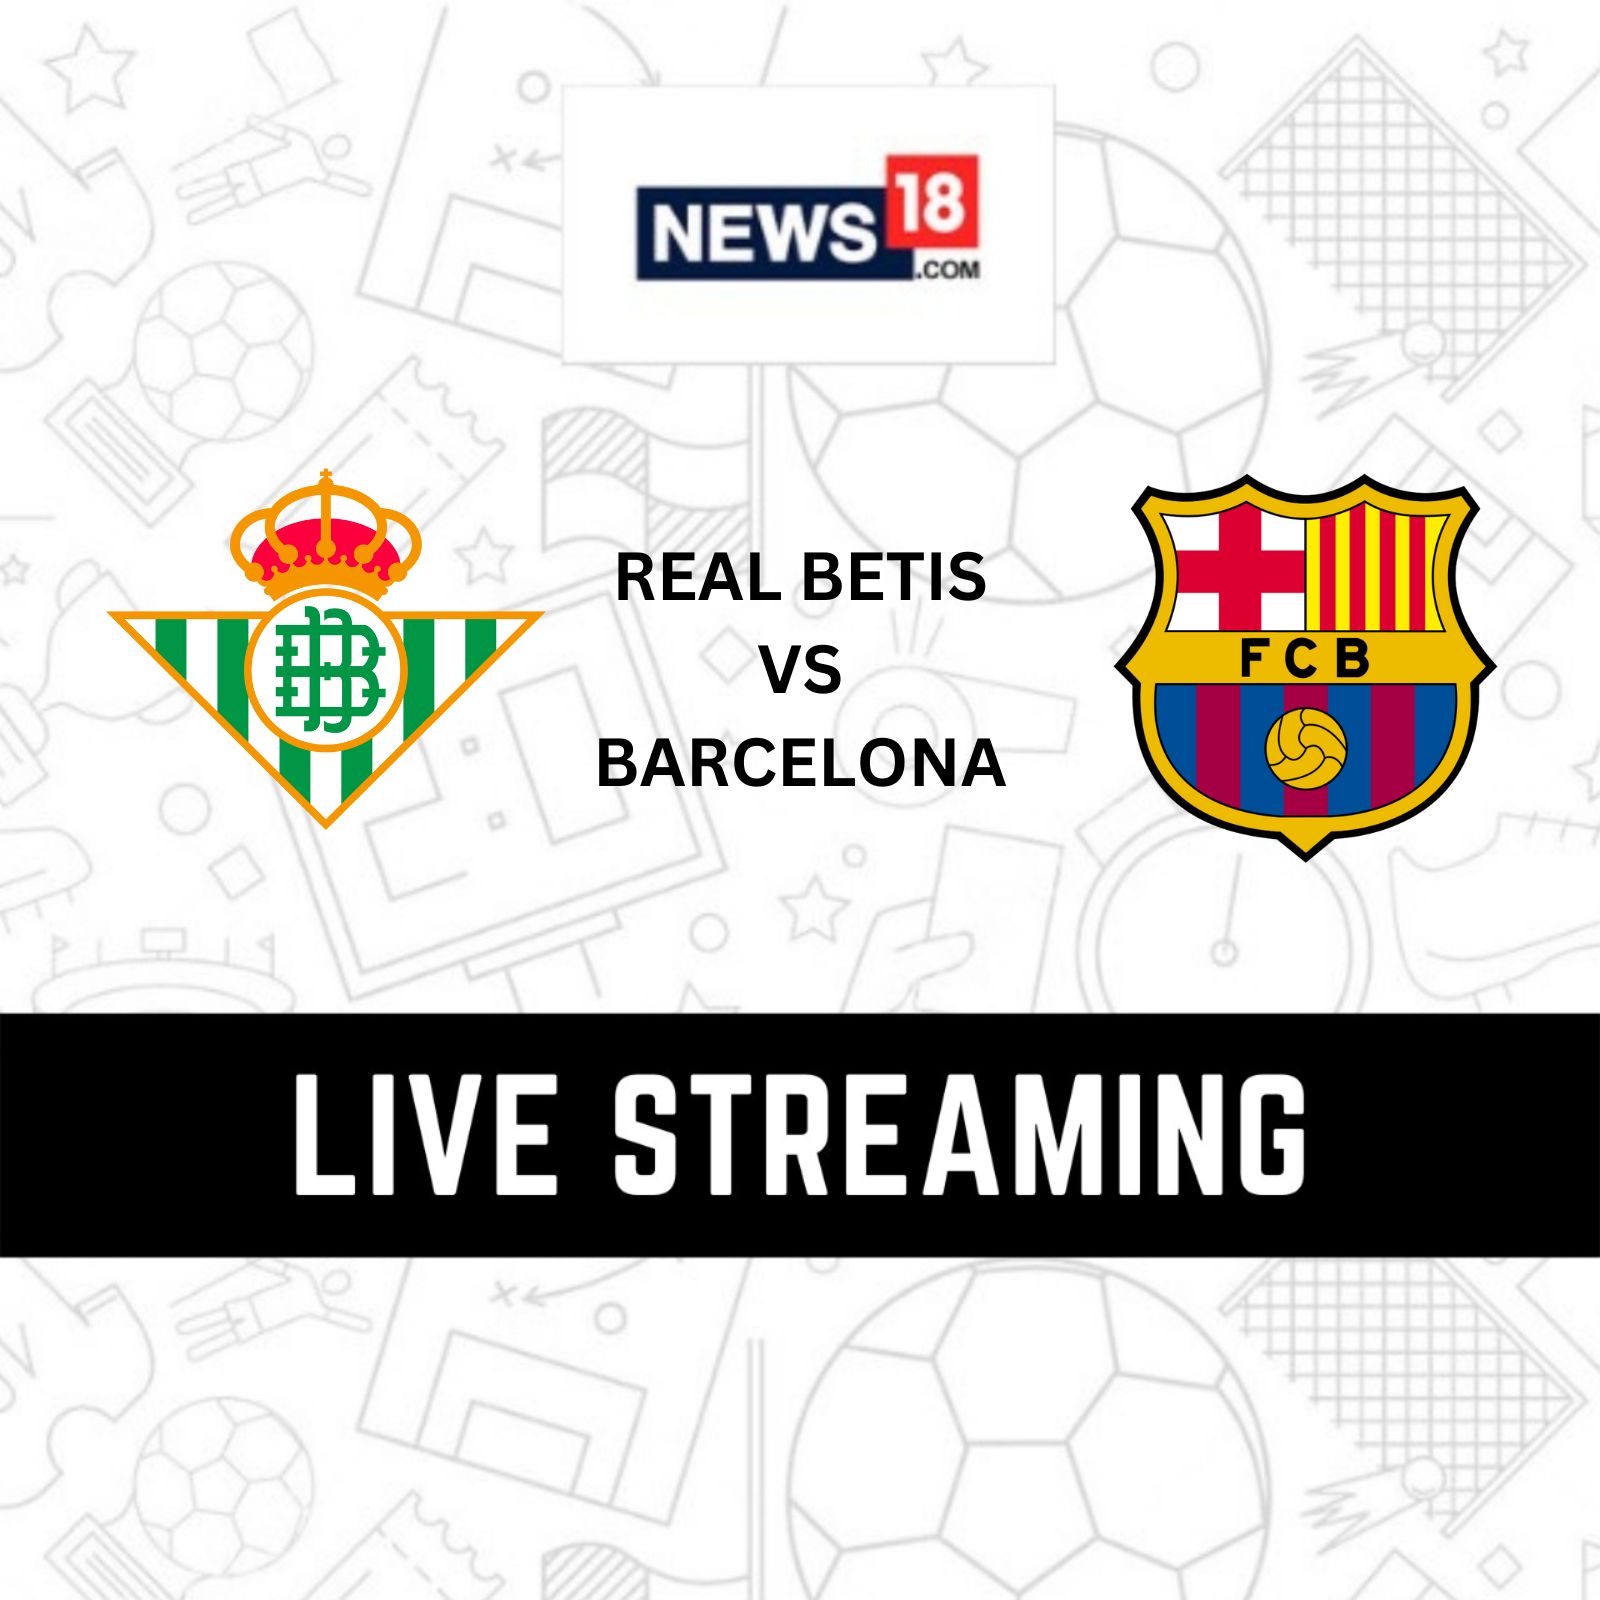 Real Betis vs Barcelona Live Streaming When and Where to Watch La Liga Match Live?